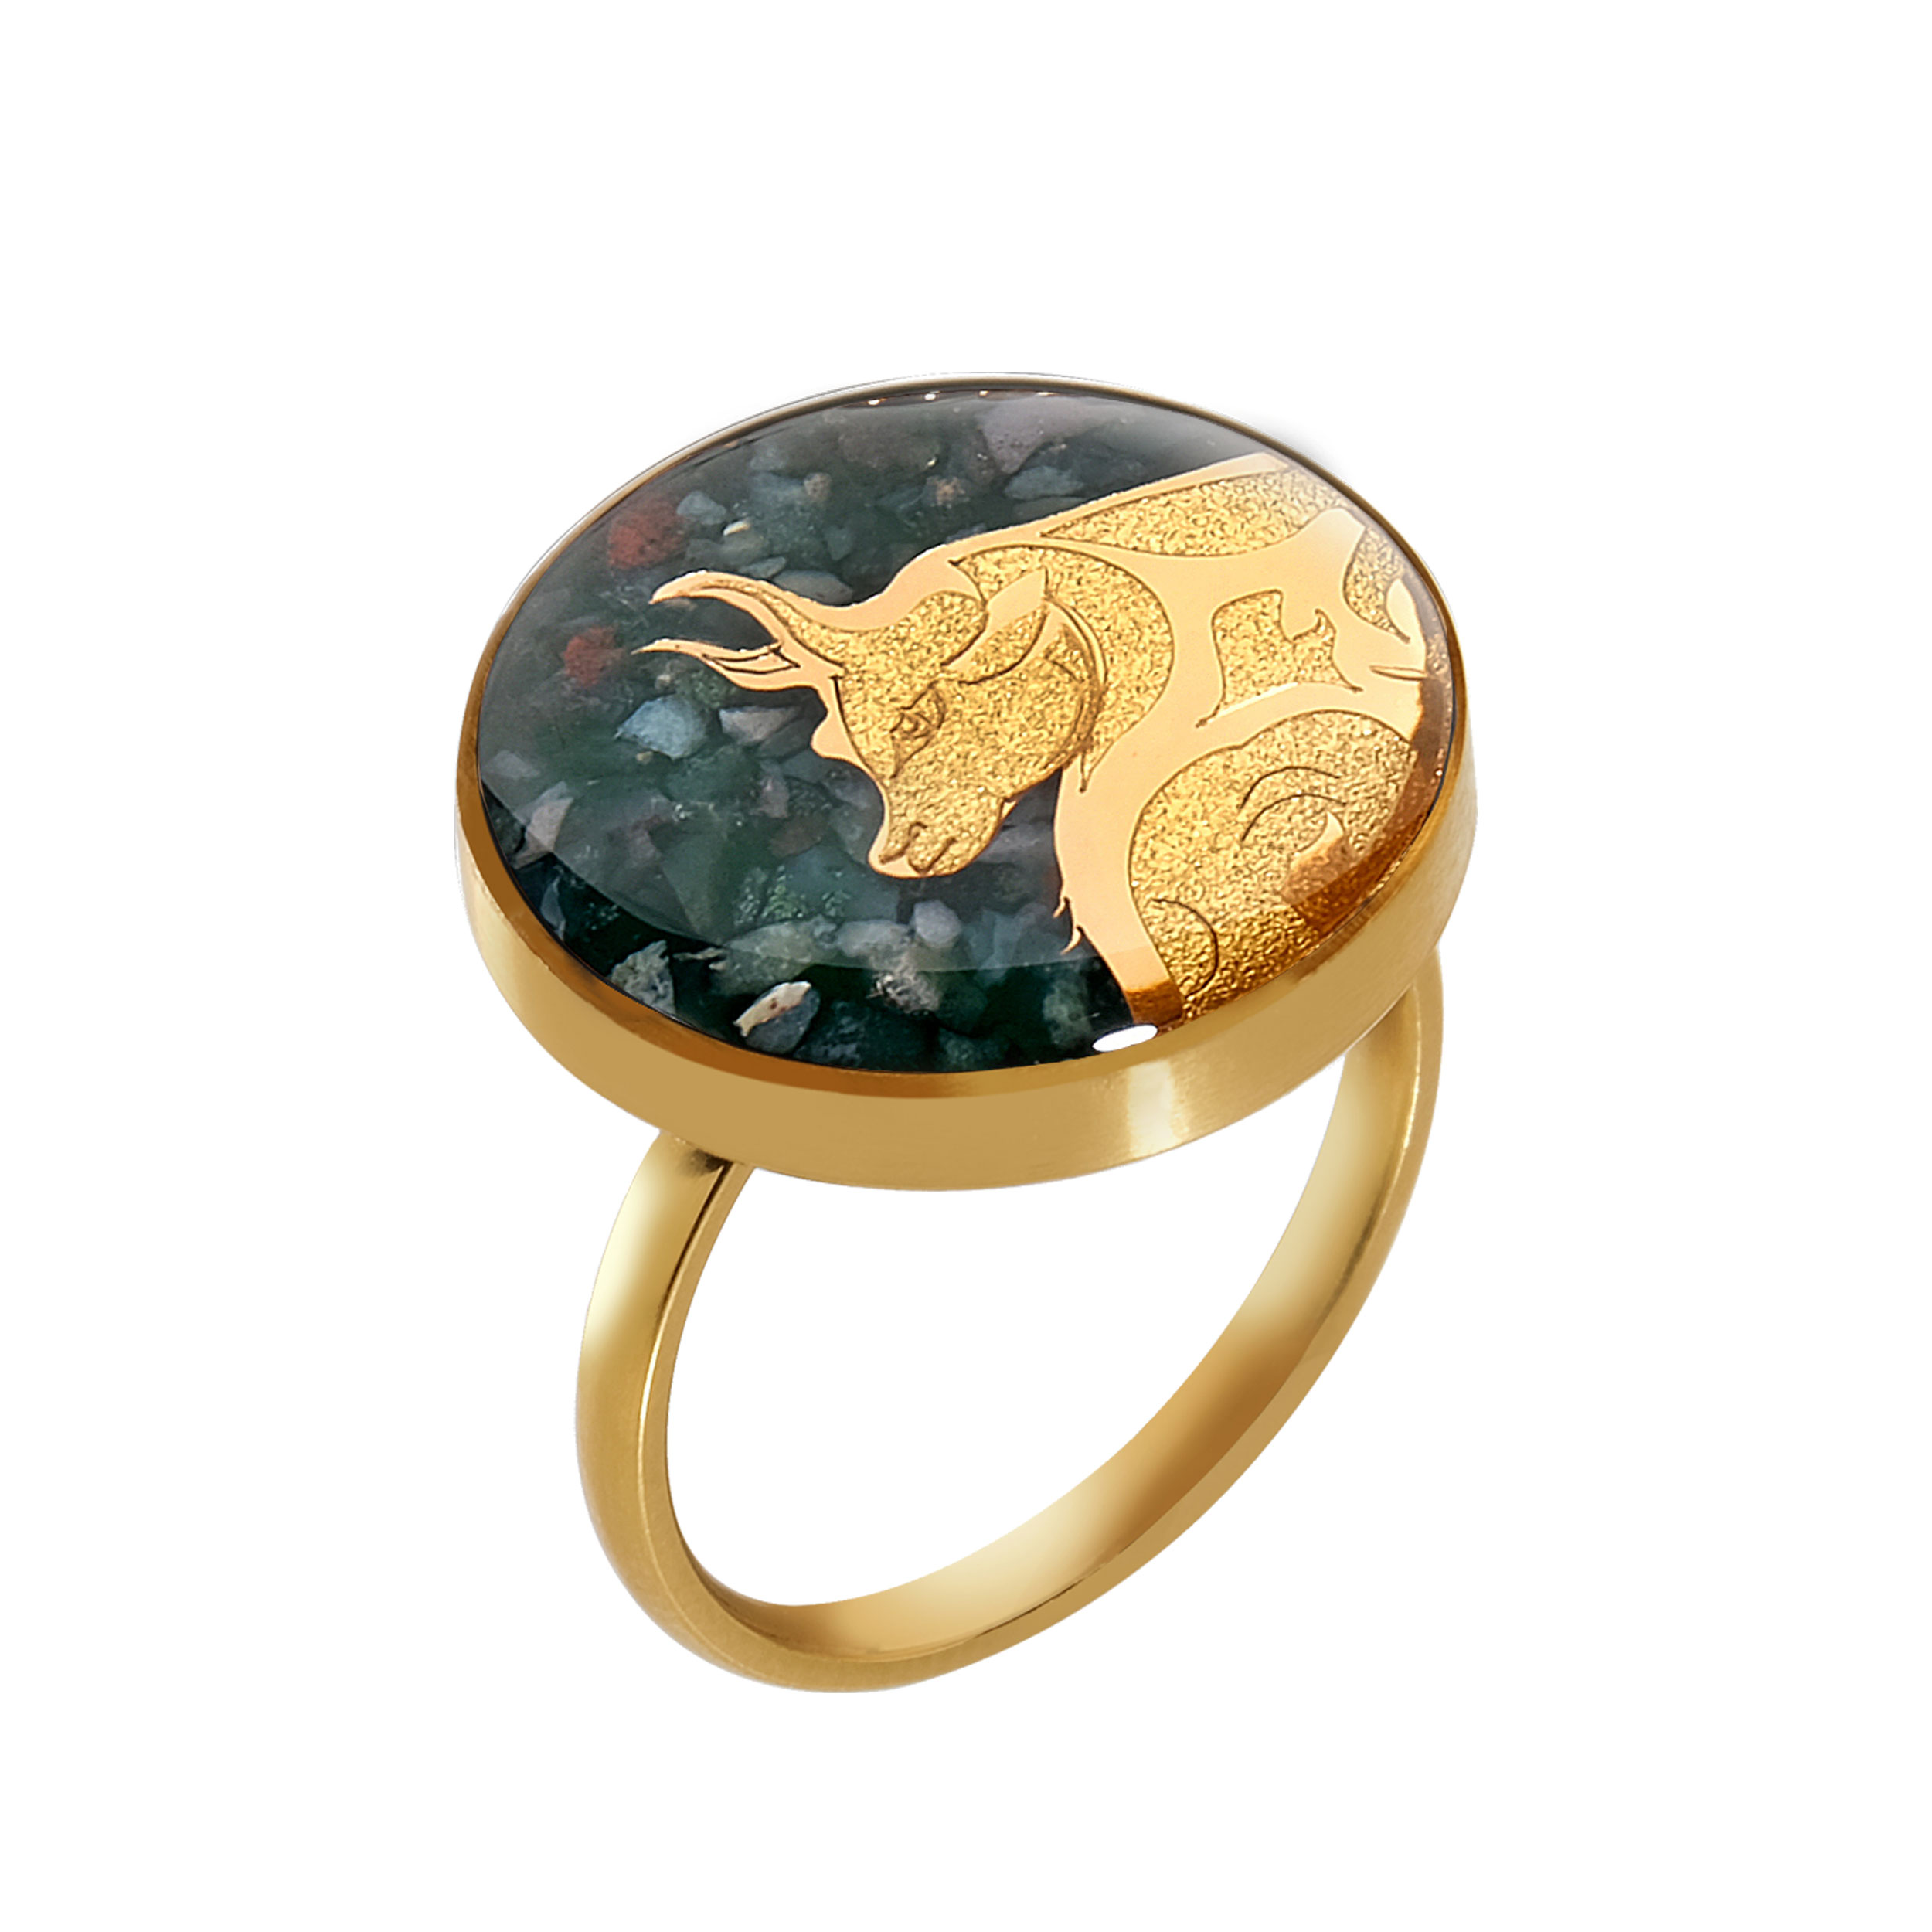 wholesale Agate ring and 24 carat gold leaf with the symbol design of May